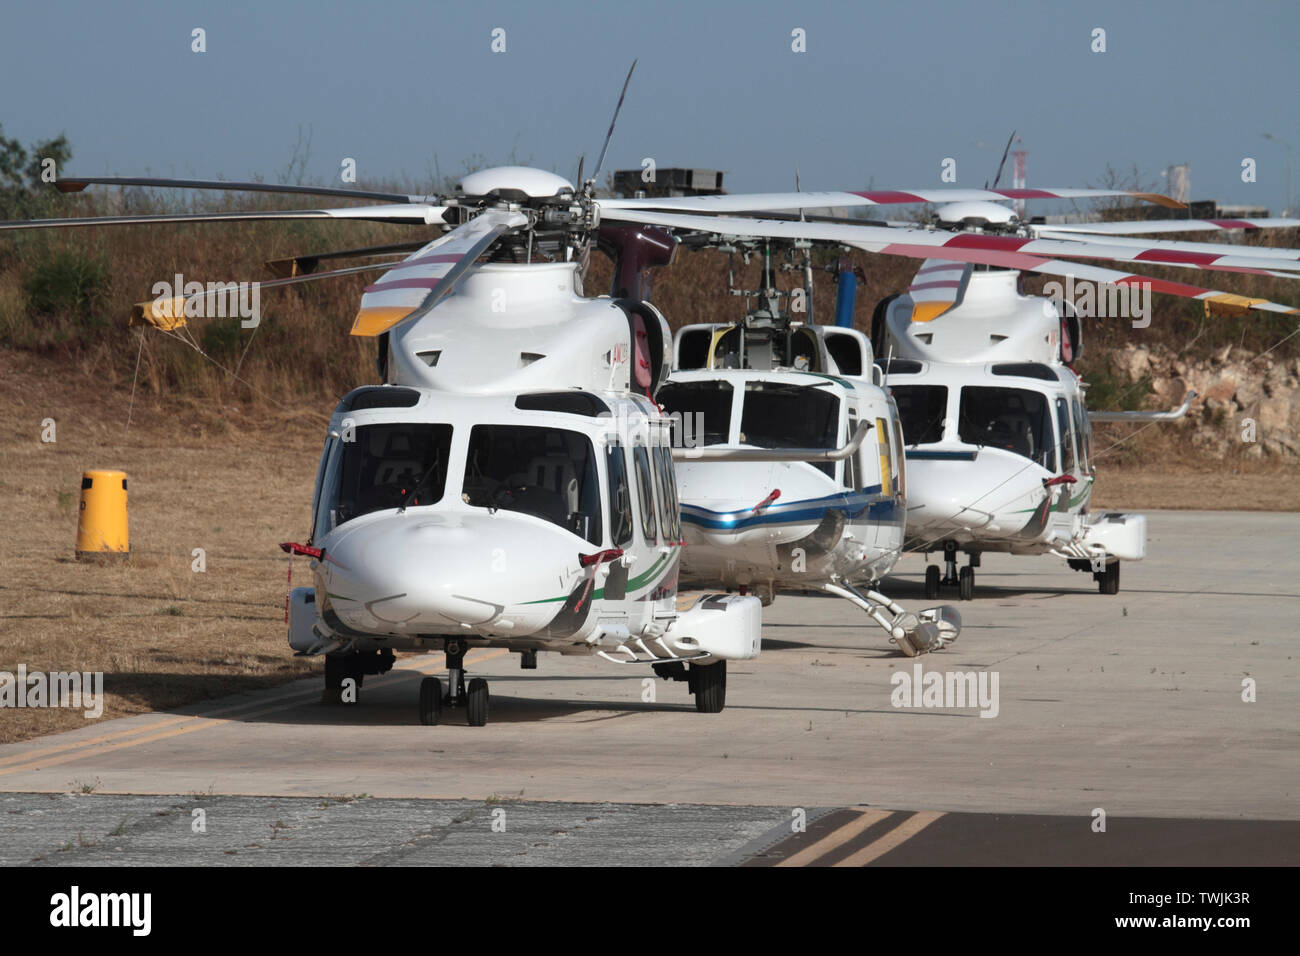 Helicopters parked on the ground. Commercial air transport and civil aviation. Front view. Stock Photo